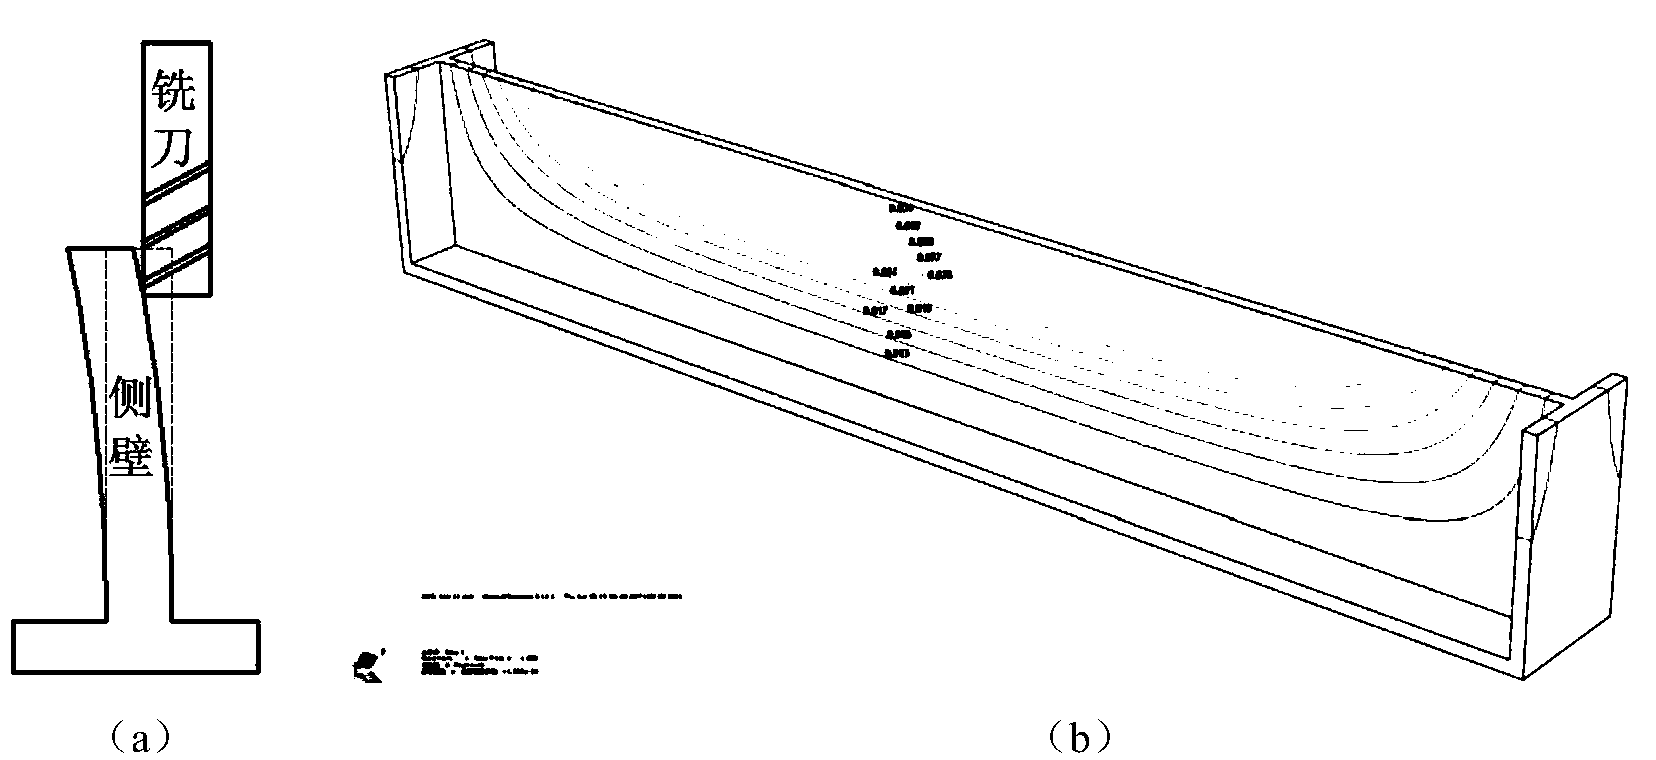 Method for controlling machining accuracy of large integrated thin-walled parts based on finite element analysis